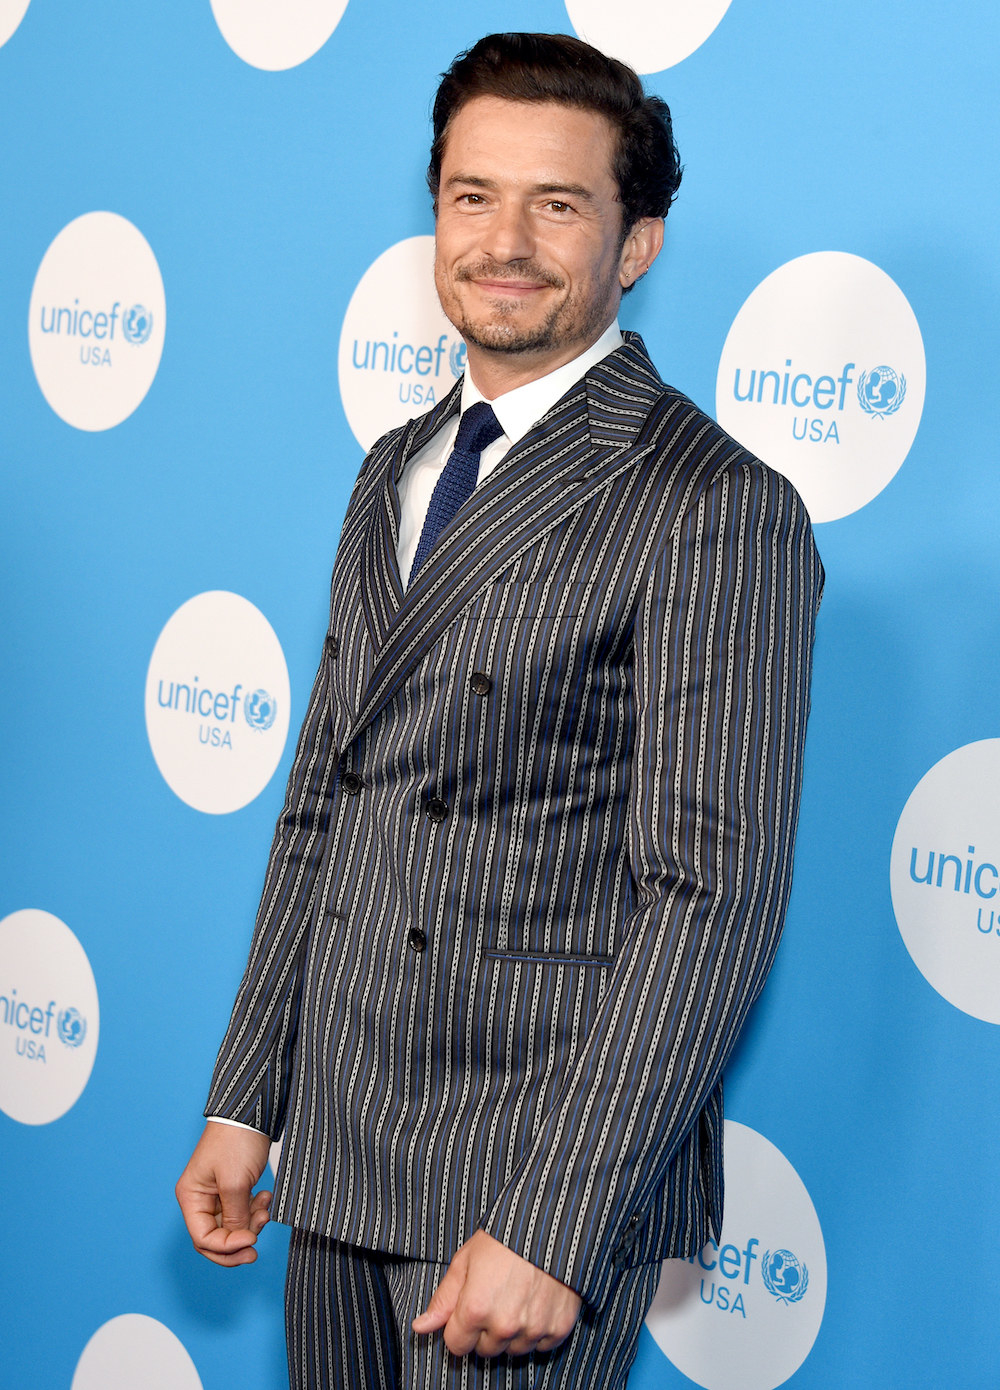 close up of Bloom in a pinstripe suit at an event